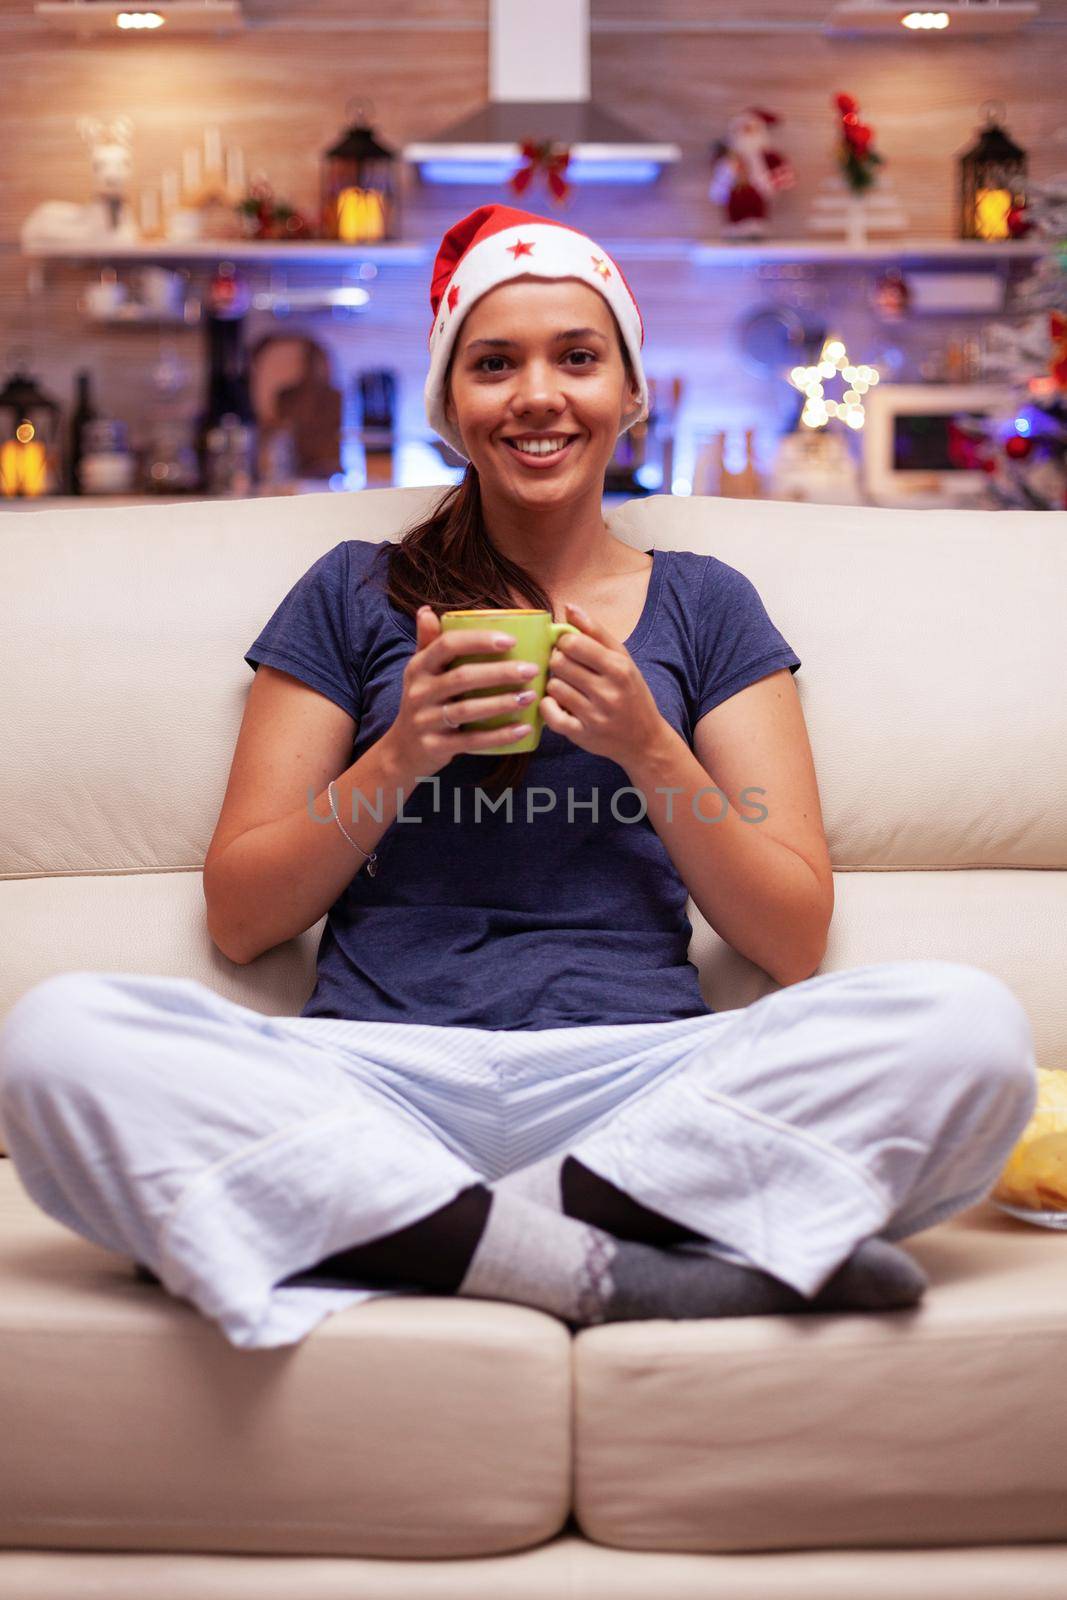 Portrait of smiling woman wearing red santa hat sitting in lotus position on sofa in xmas decorated kitchen looking into camera enjoying christmas holiday. Woman celebrating winter season